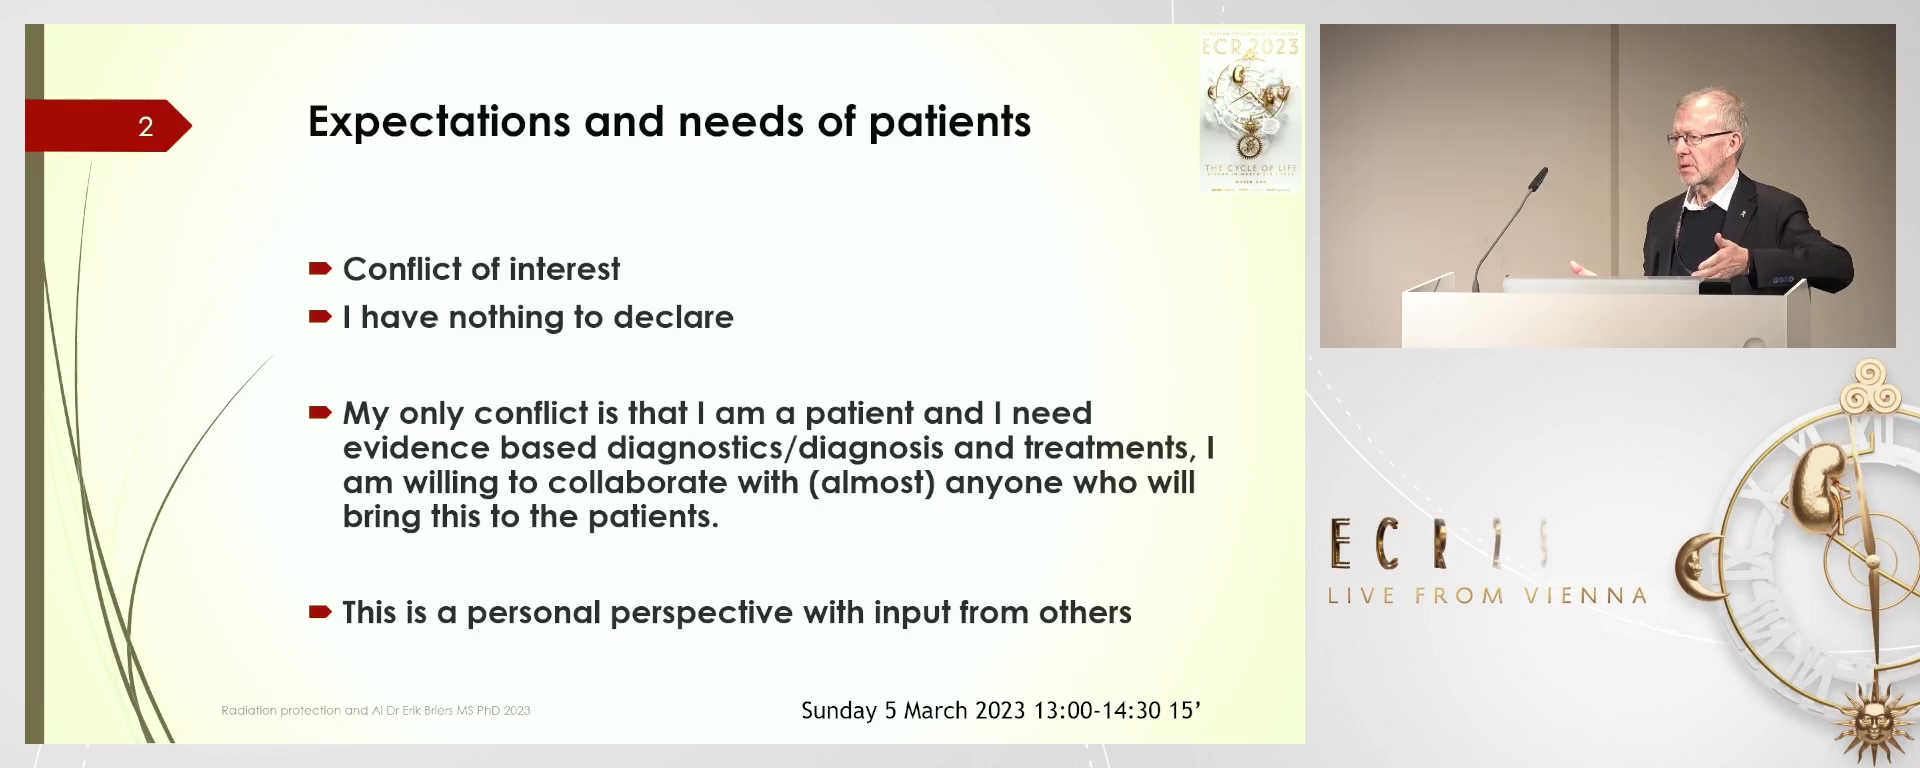 Expectations and needs of patients